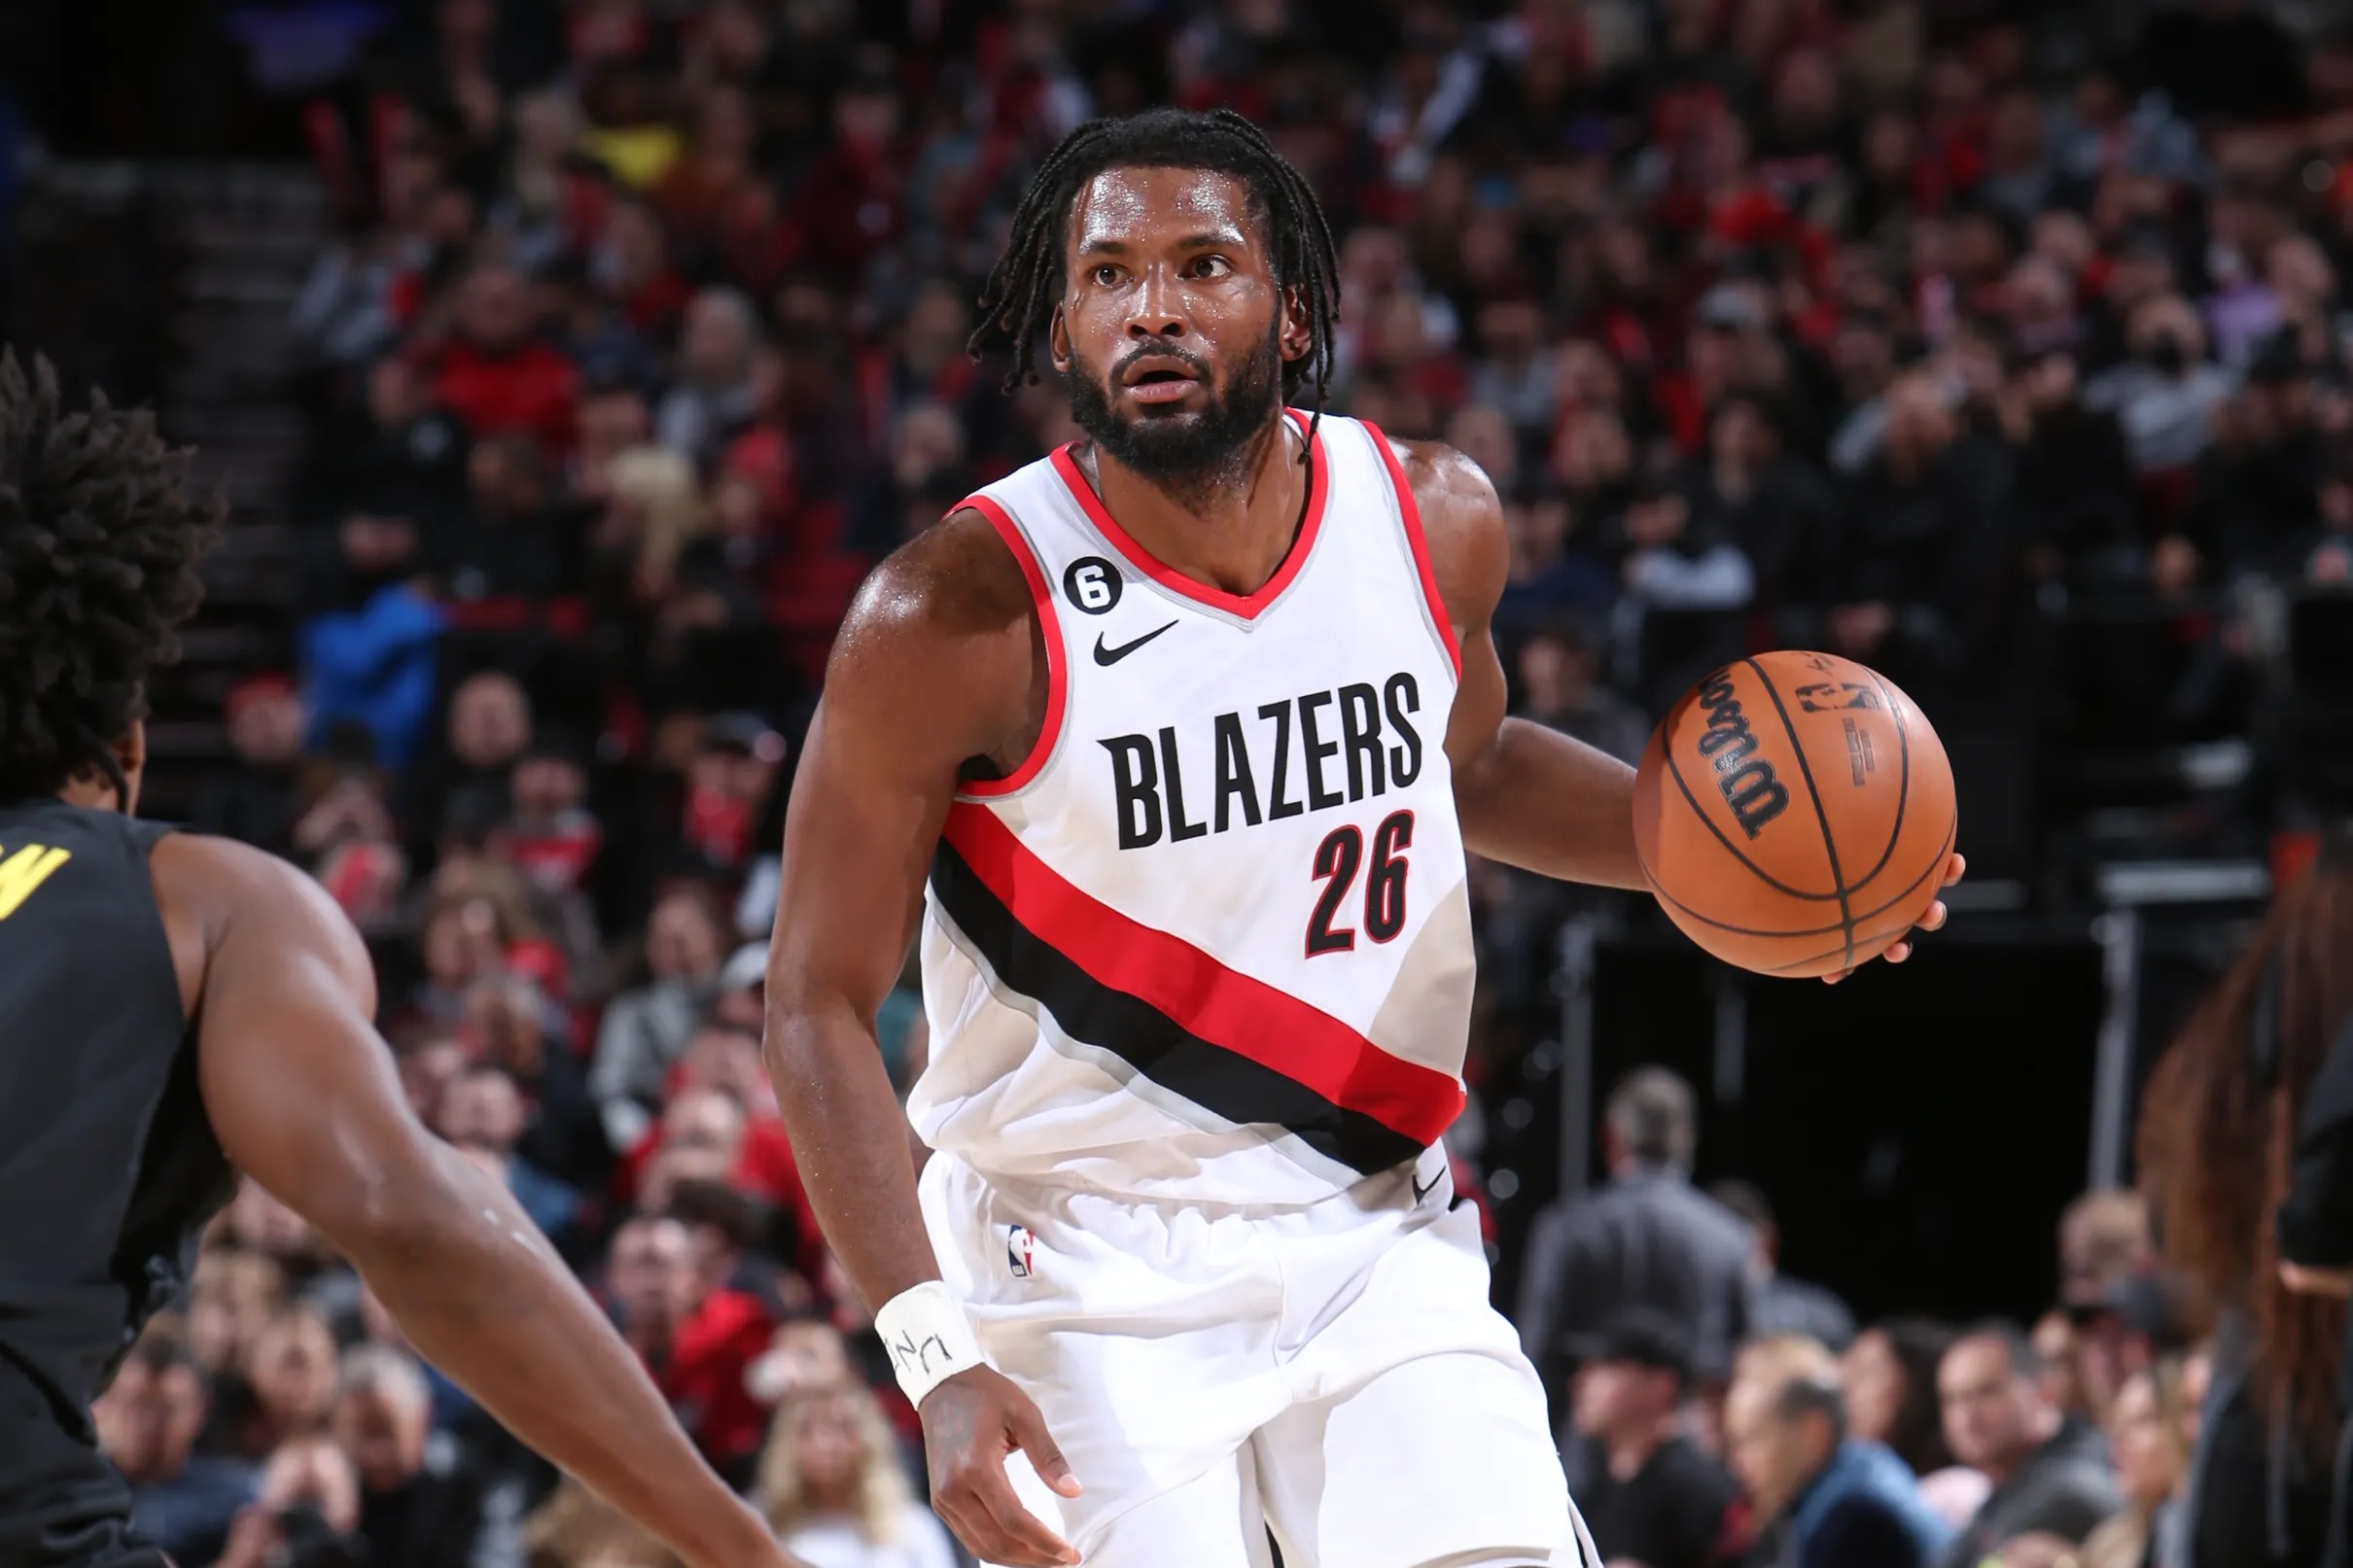 Justise Winslow to Replace Shaedon Sharpe in Blazers Starting Lineup